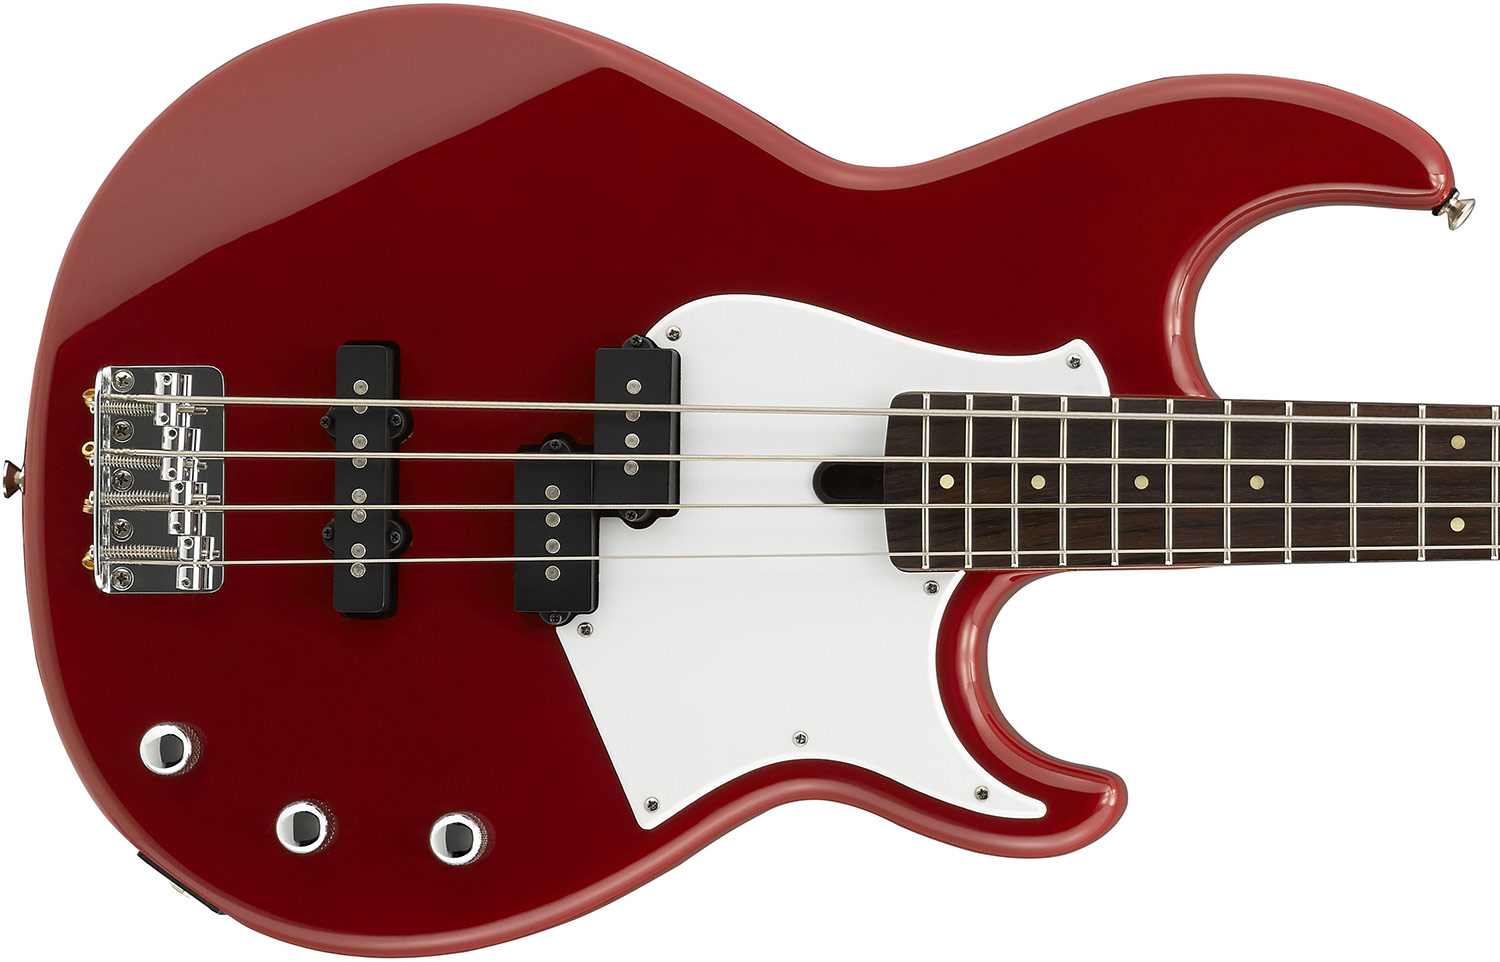 Yamaha Bb234 Rr Rw - Raspberry Red - Solid body electric bass - Variation 1